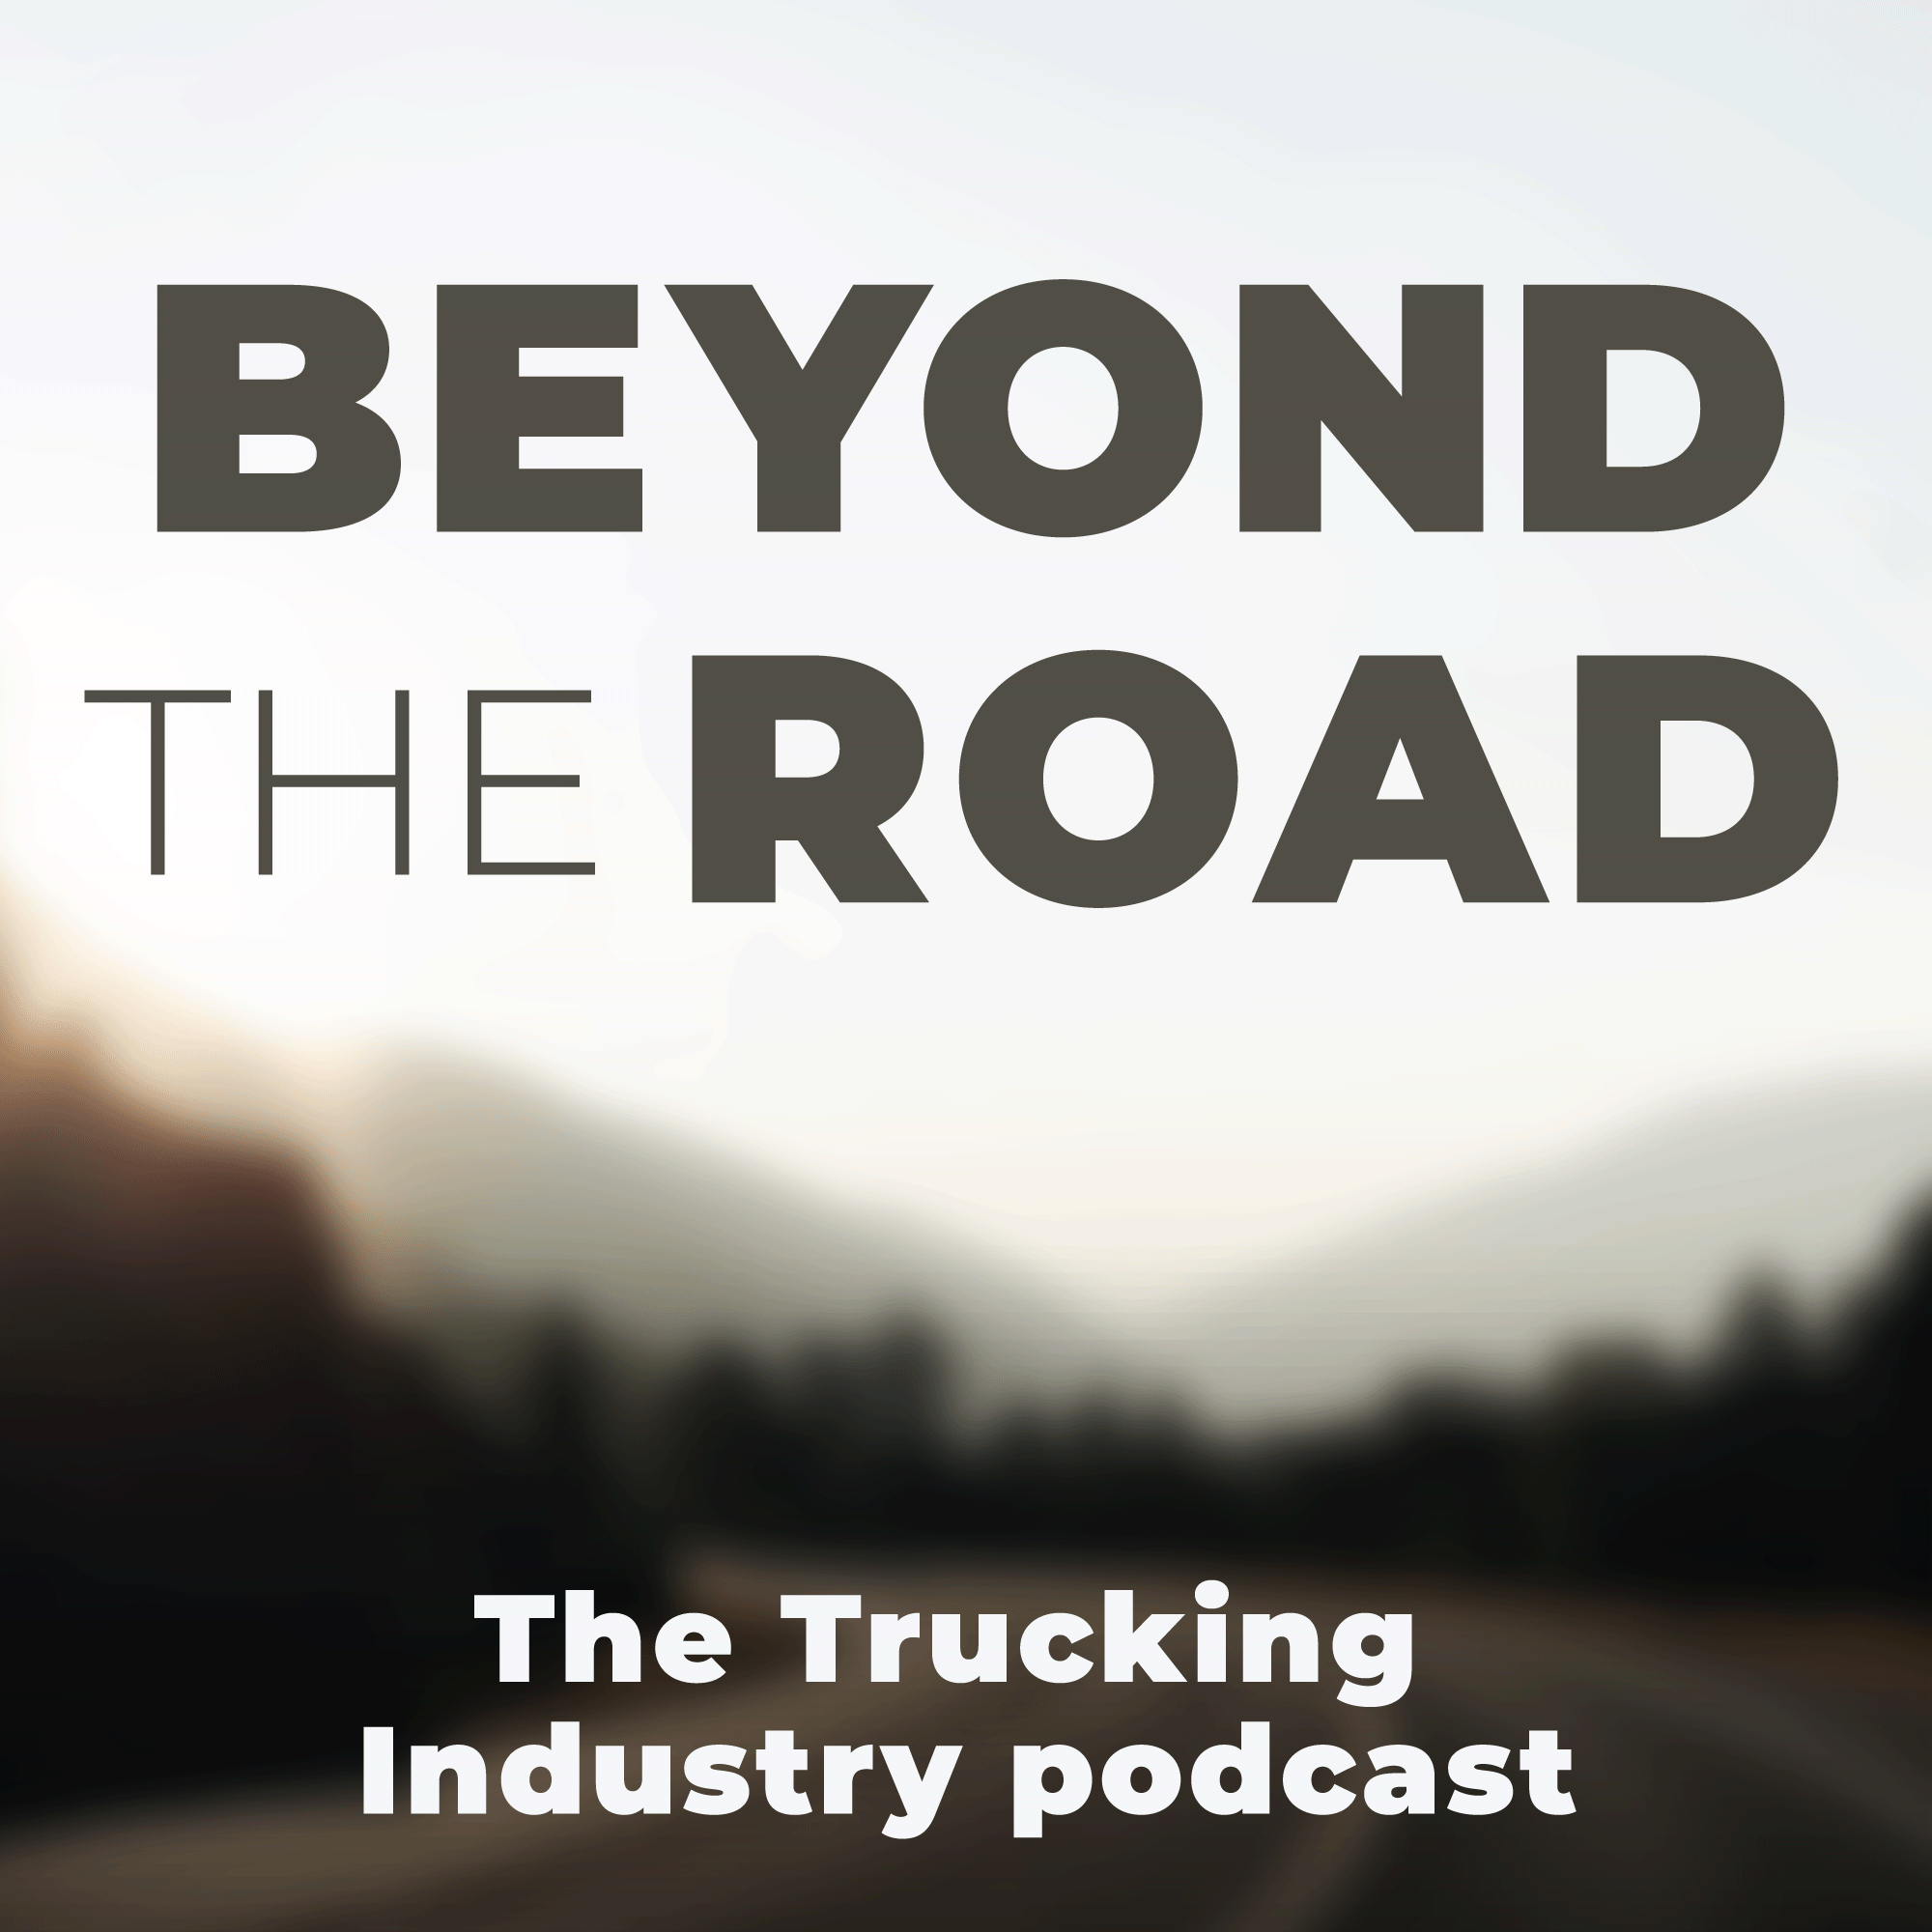 Beyond the Road Podcast logo